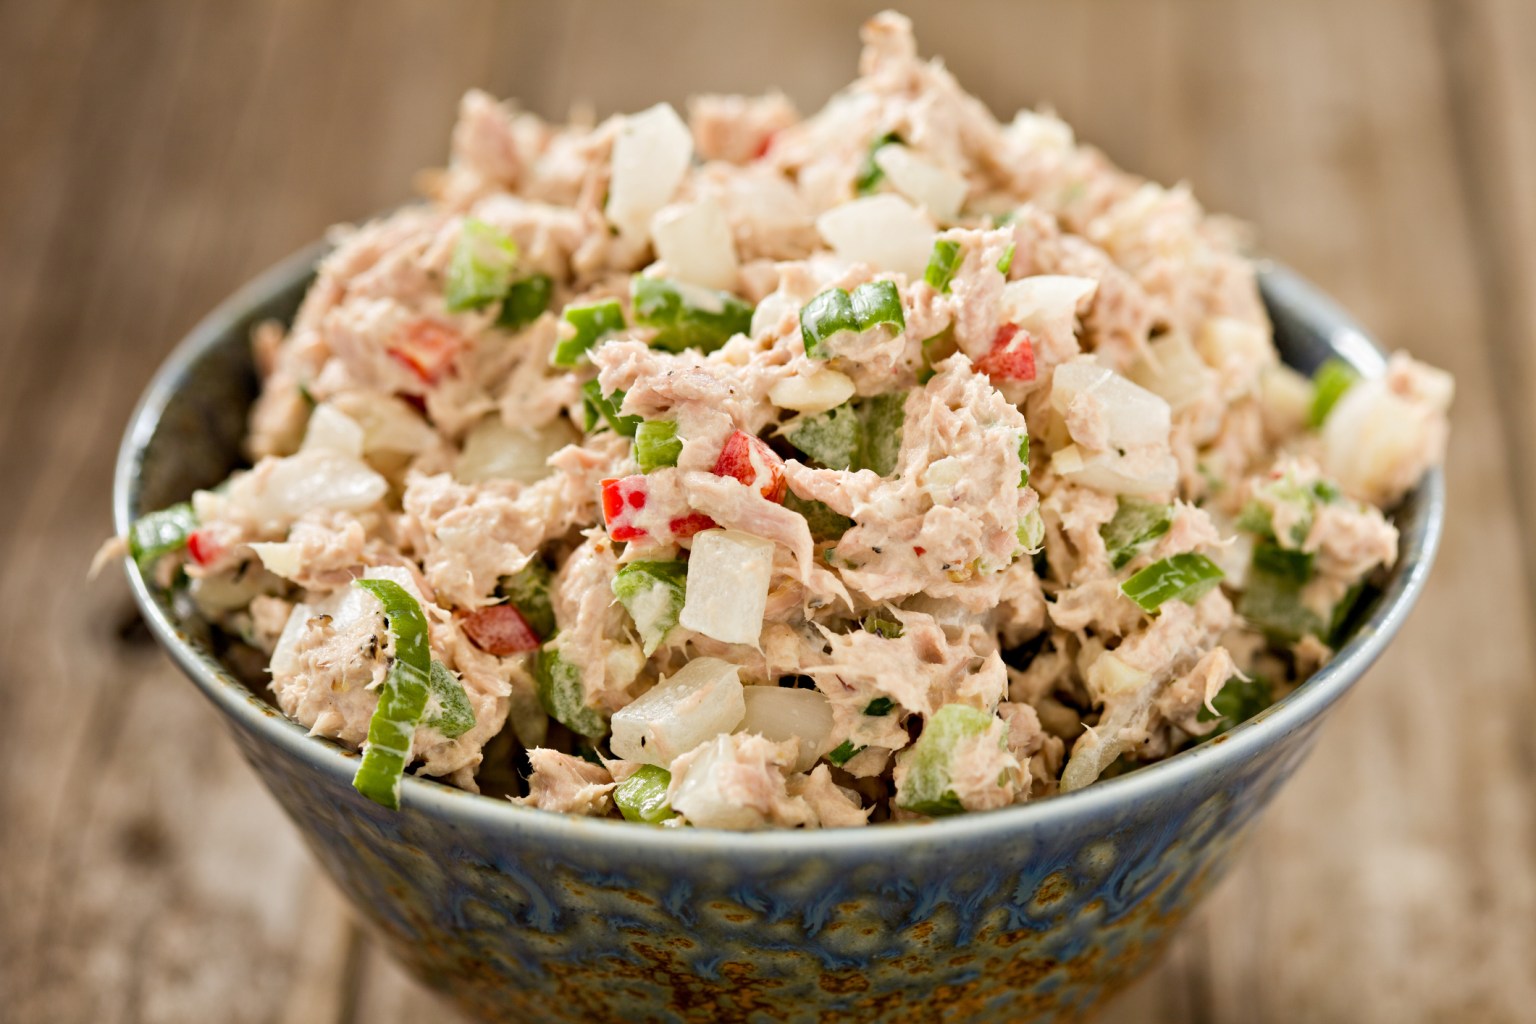 Low Carb Meals for Your Budget. Tuna